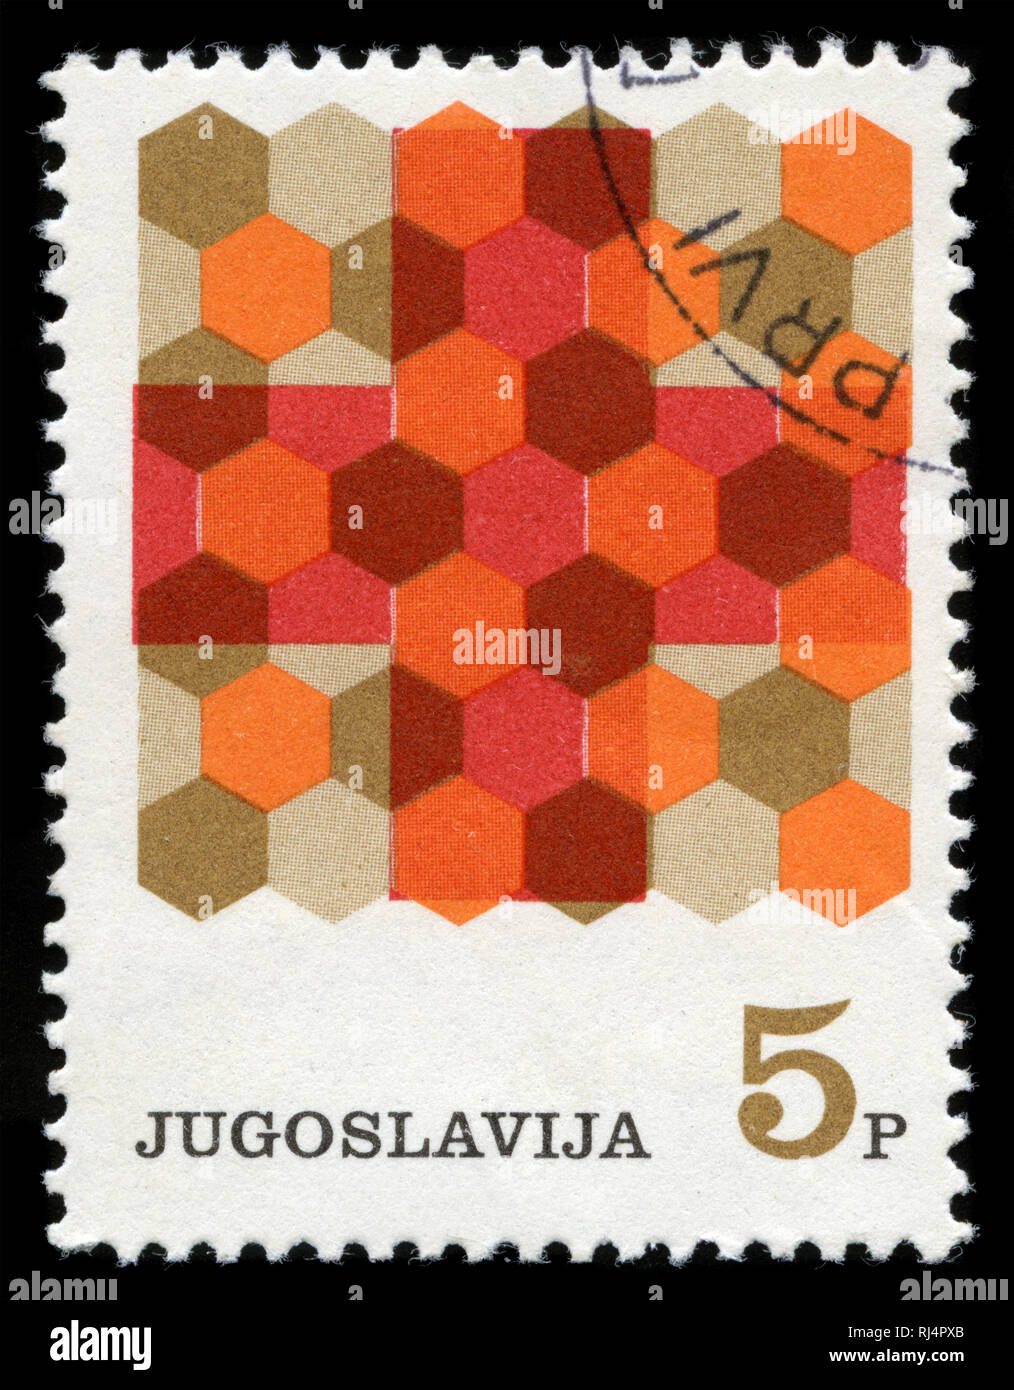 Postage stamp from the former state of Yugoslavia in the Red Cross series issued in 1968 Stock Photo